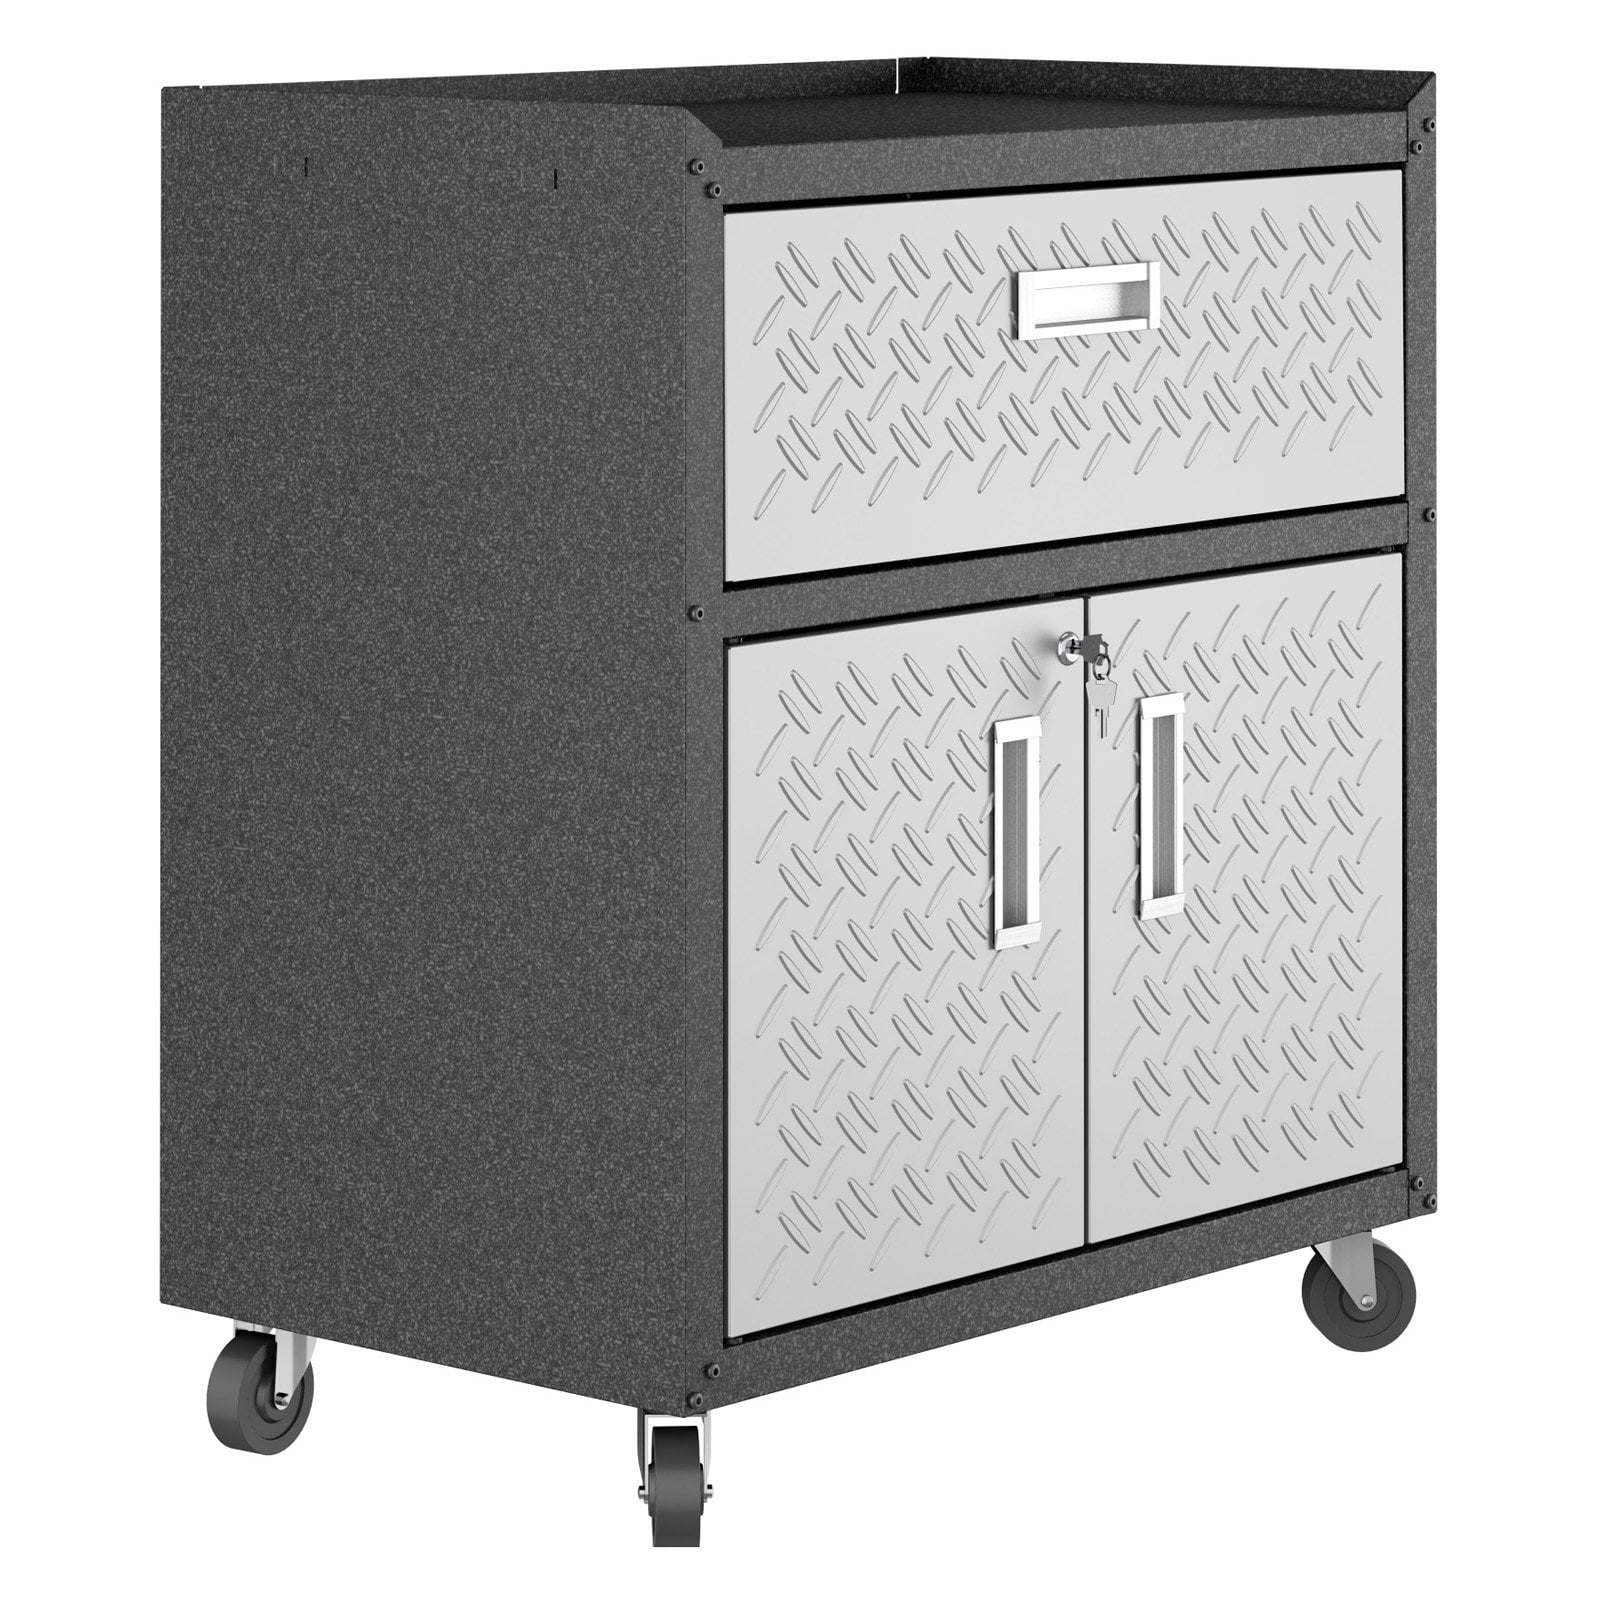 Details about  / Fortress Textured Metal 31.5/" Garage Mobile Cabinet with 1 Full Extension Dra...